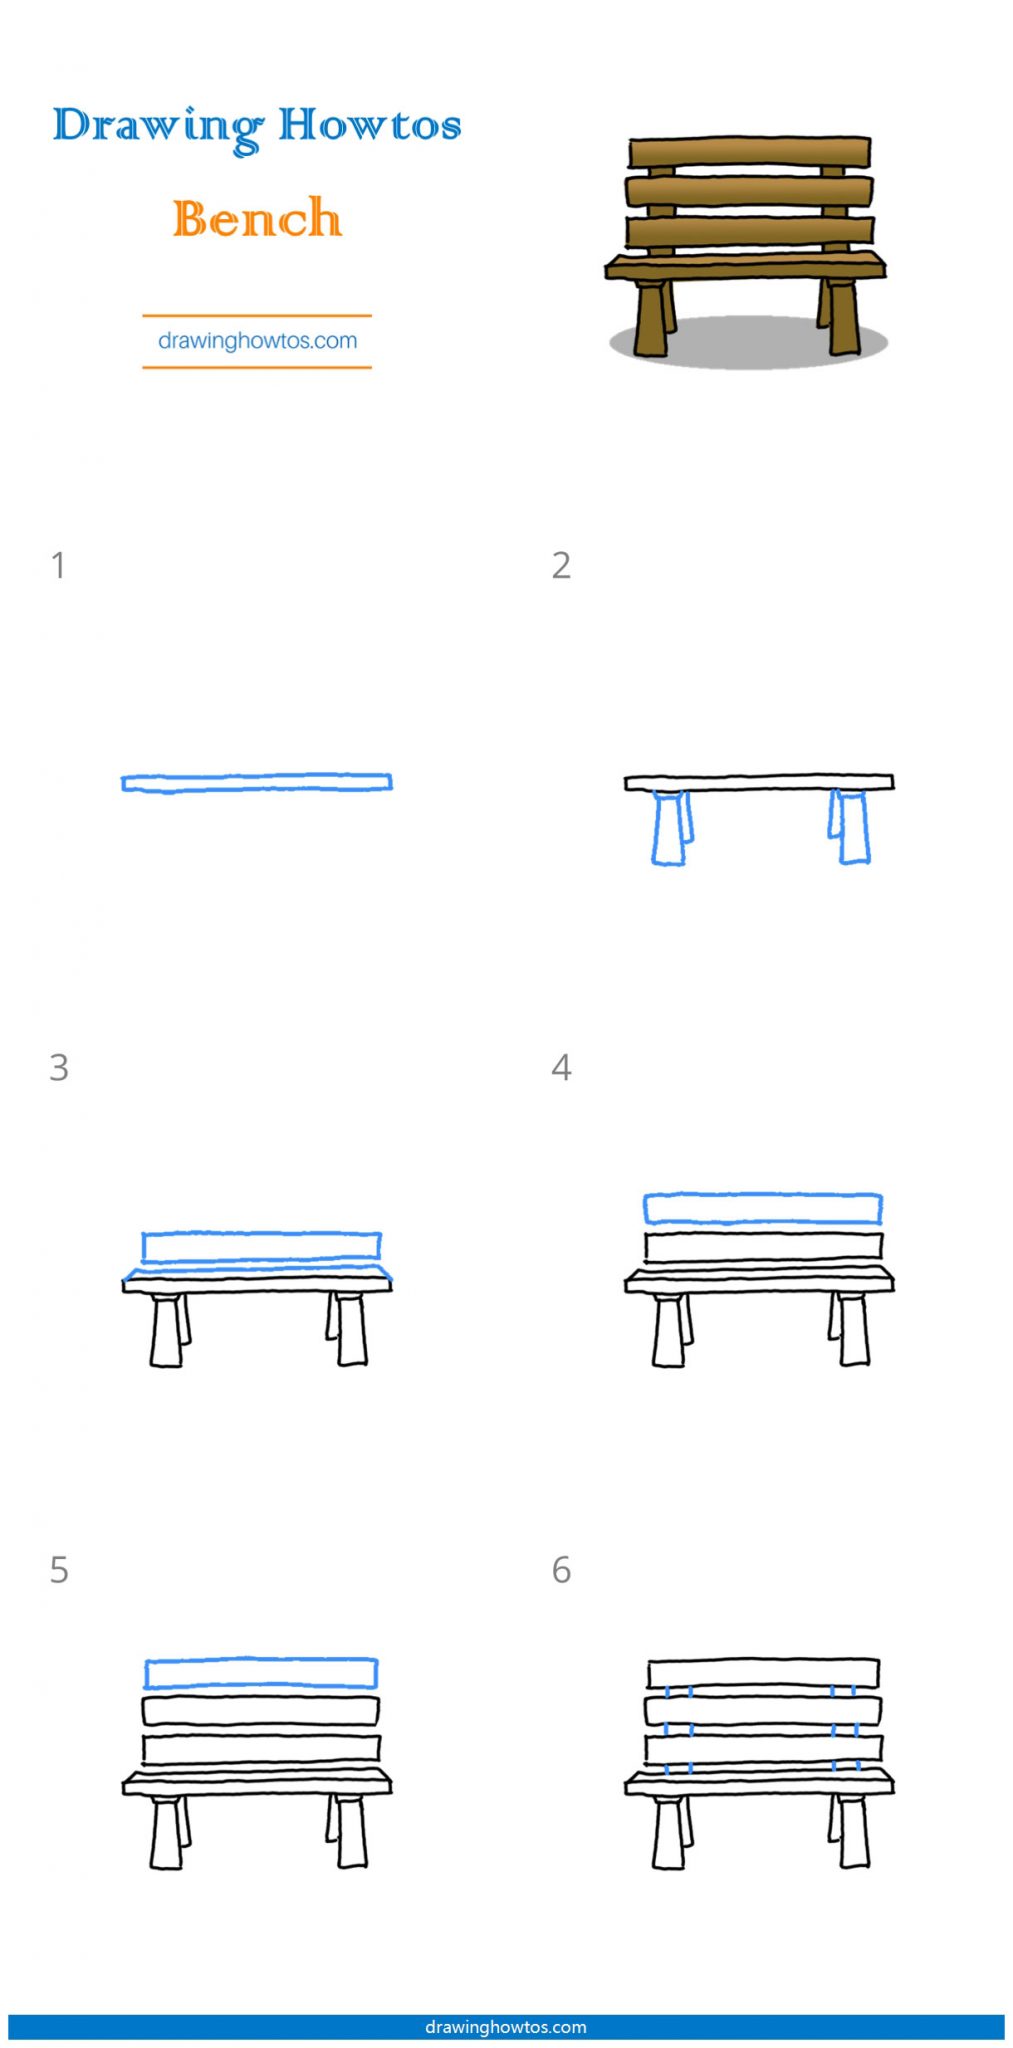 How to Draw a Bench - Step by Step Easy Drawing Guides - Drawing Howtos